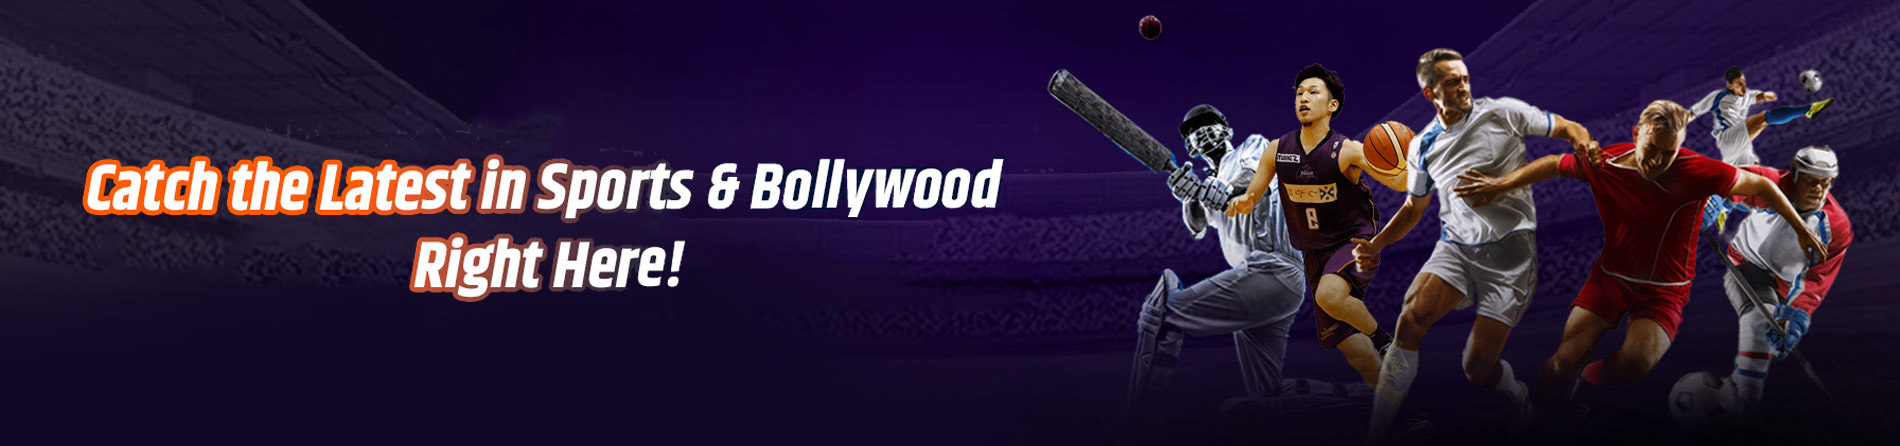 Catch the Latest In Sports and Bollywood Right Here!